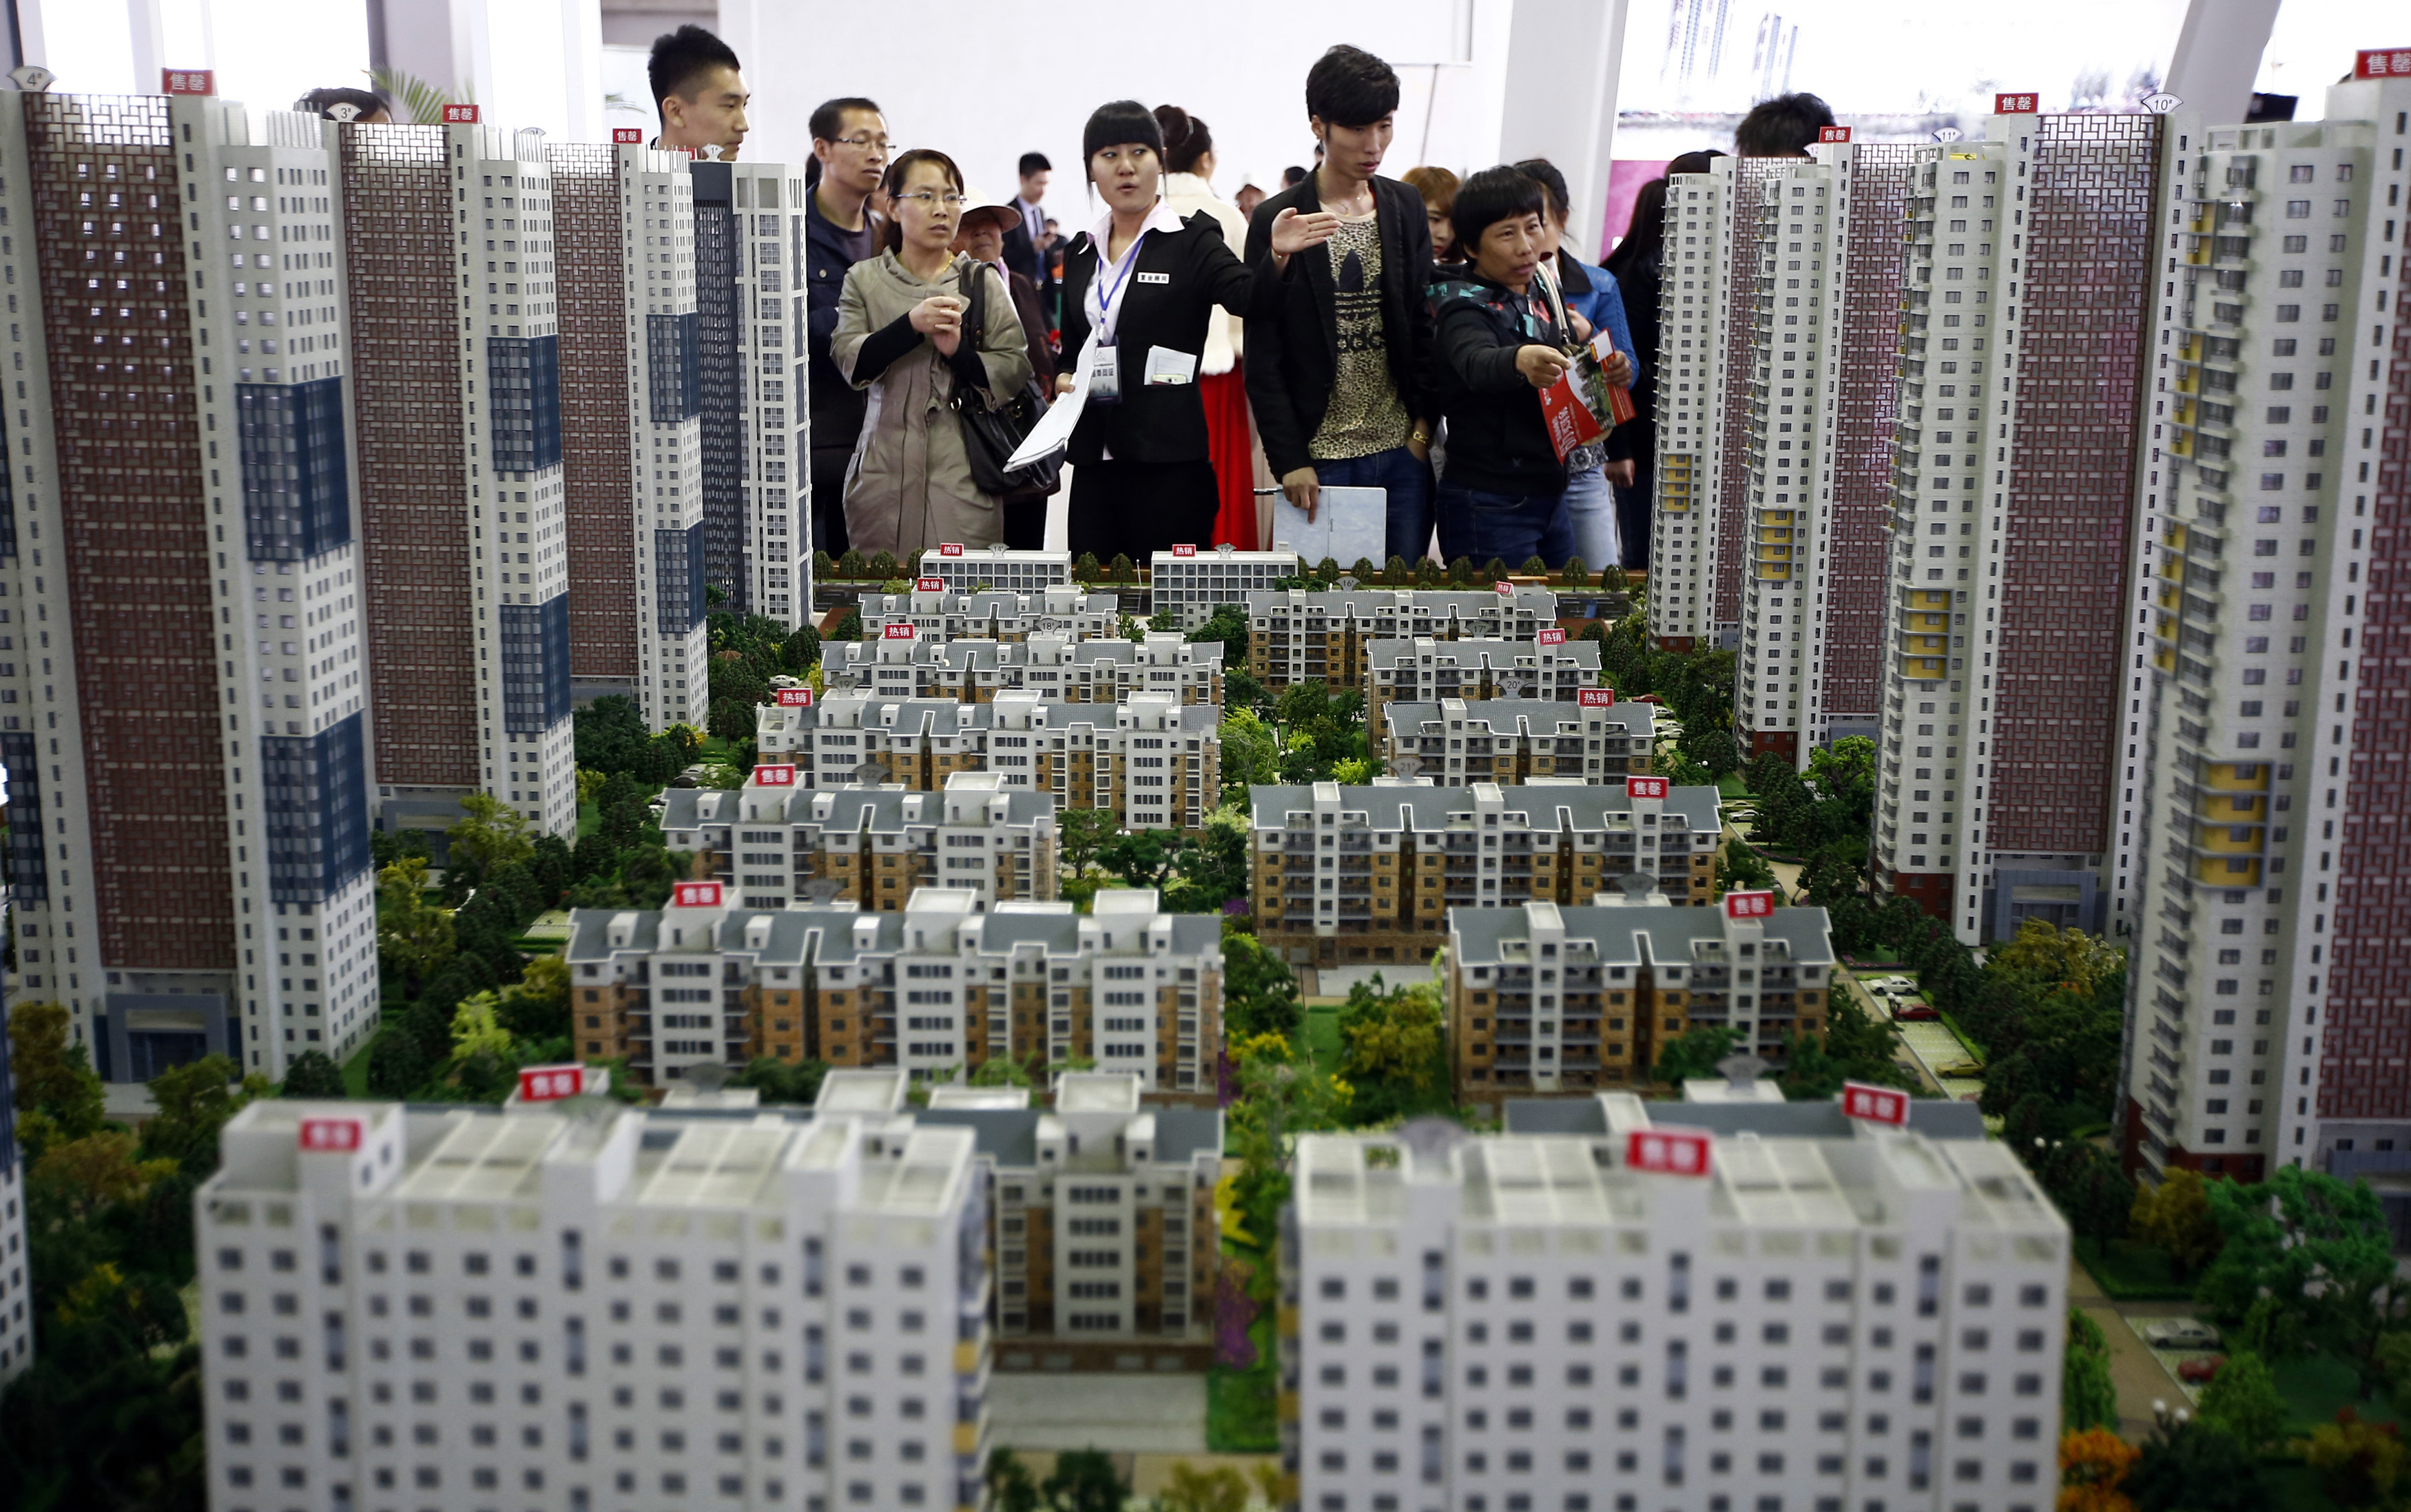 A sales assistant talks to visitors in front of models of apartments at a real estate exhibition in Shenyang